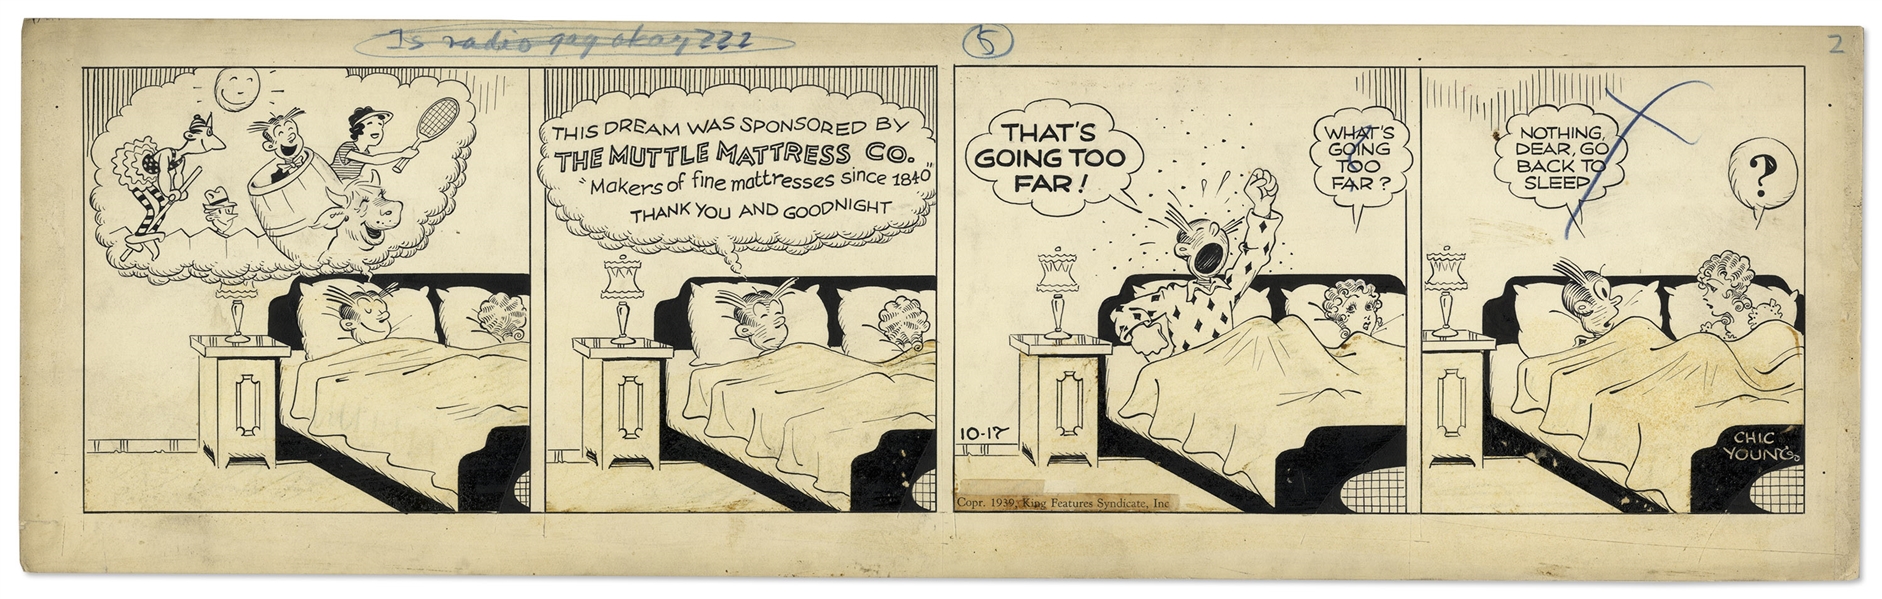 Chic Young Hand-Drawn ''Blondie'' Comic Strip From 1939 Titled ''The Sandman Does a Commercial!''